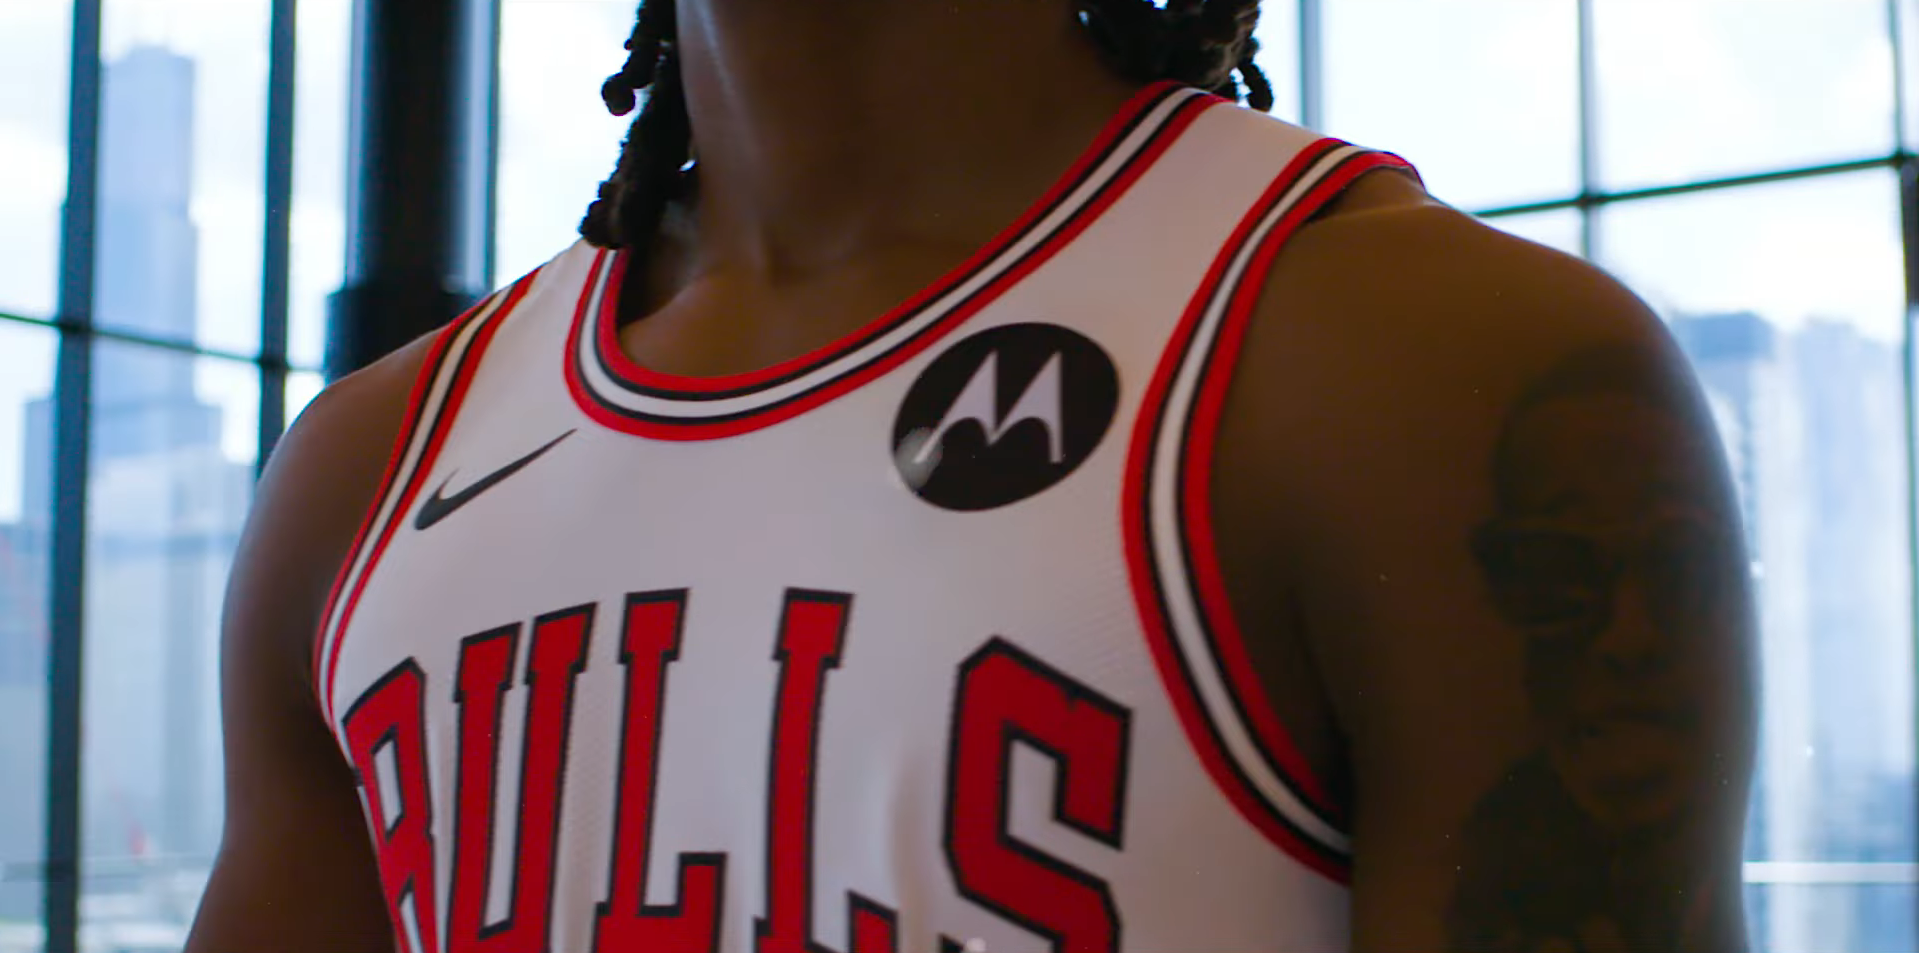 Chicago Bulls City Edition Uniforms Have Officially Dropped